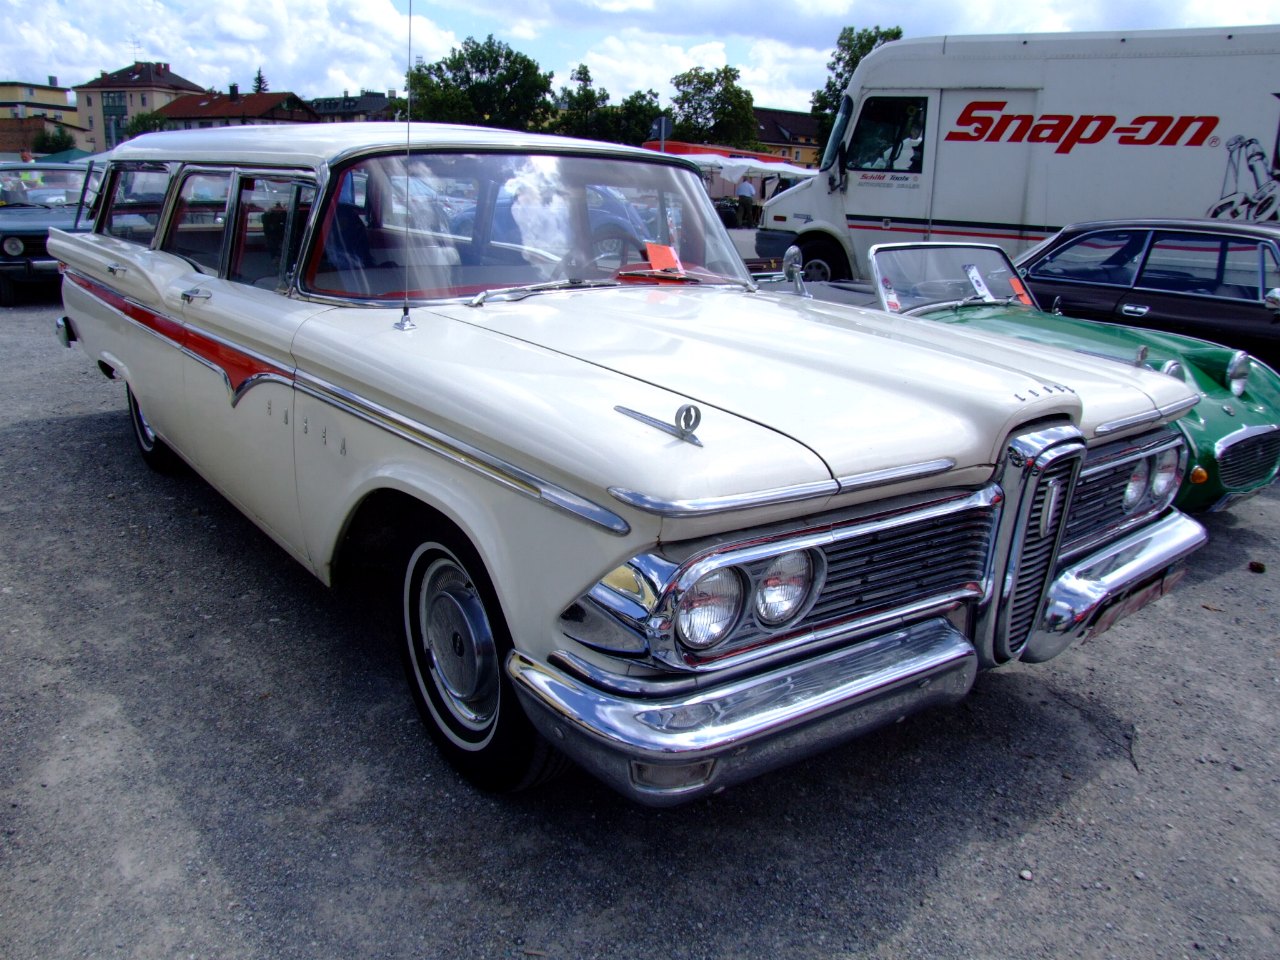 Picture of the ford edsel #8